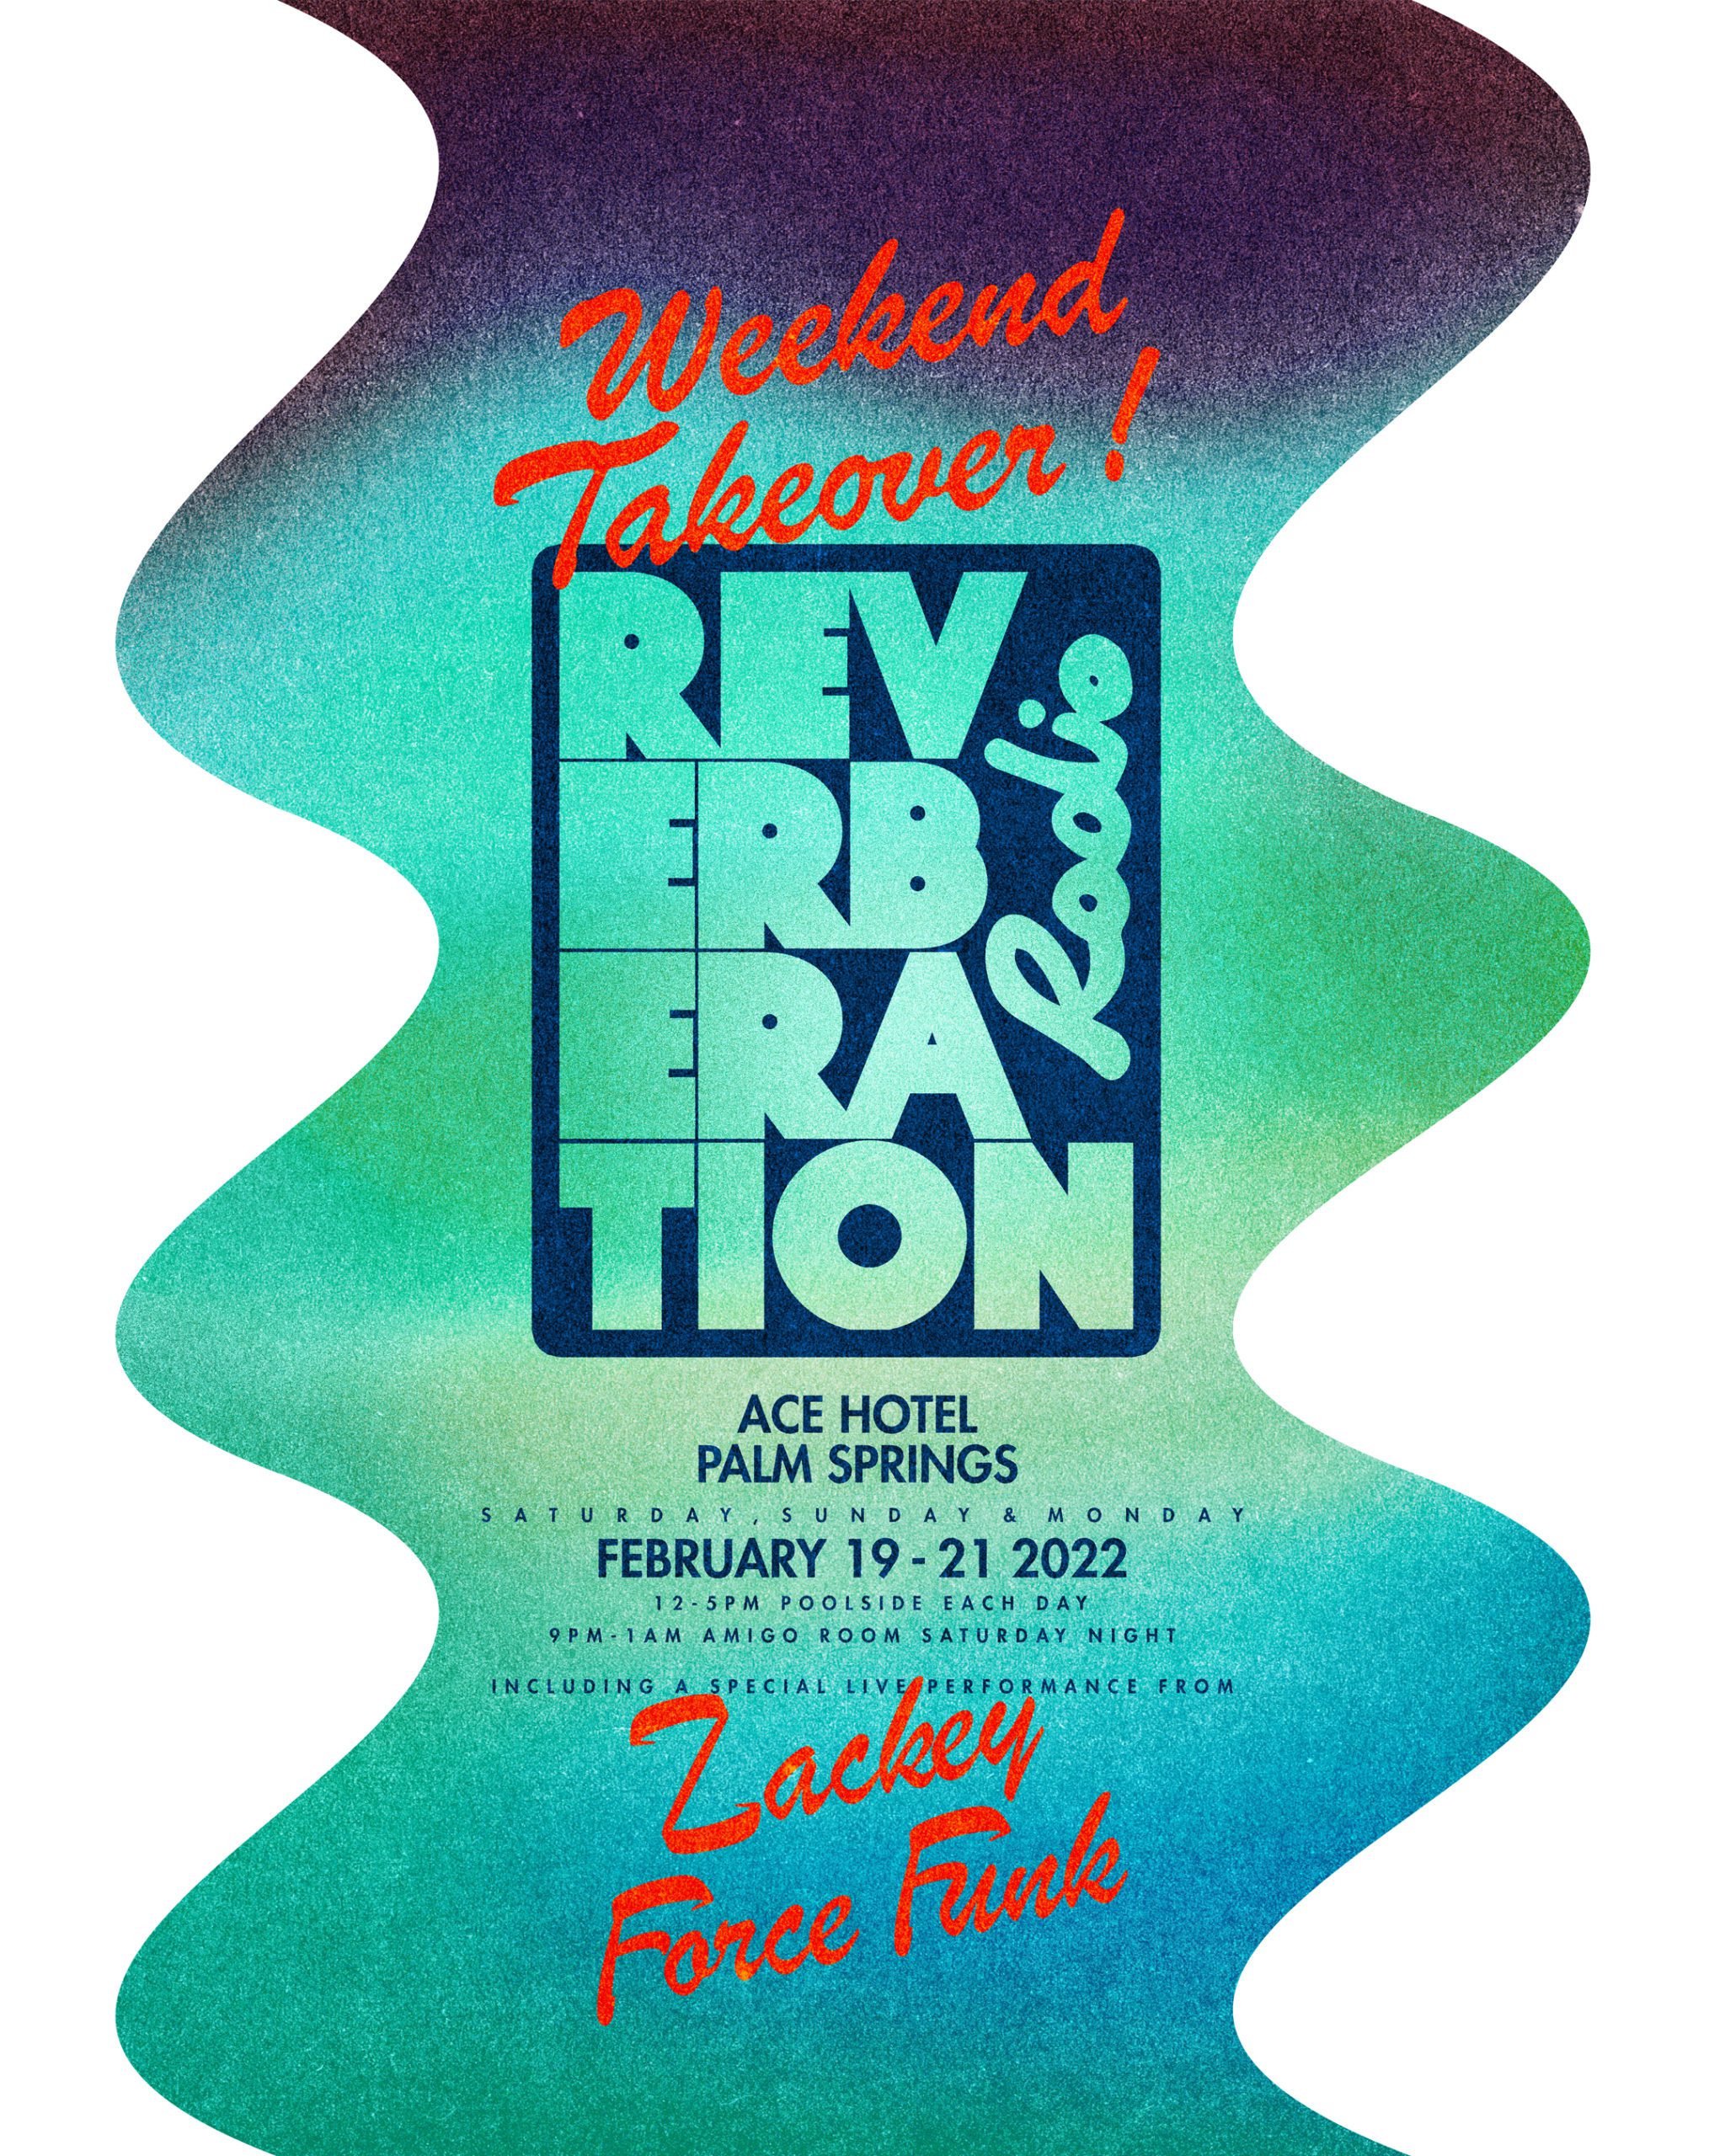 Reverberation Radio with Zackey Force Funk – Weekend Takeover promo